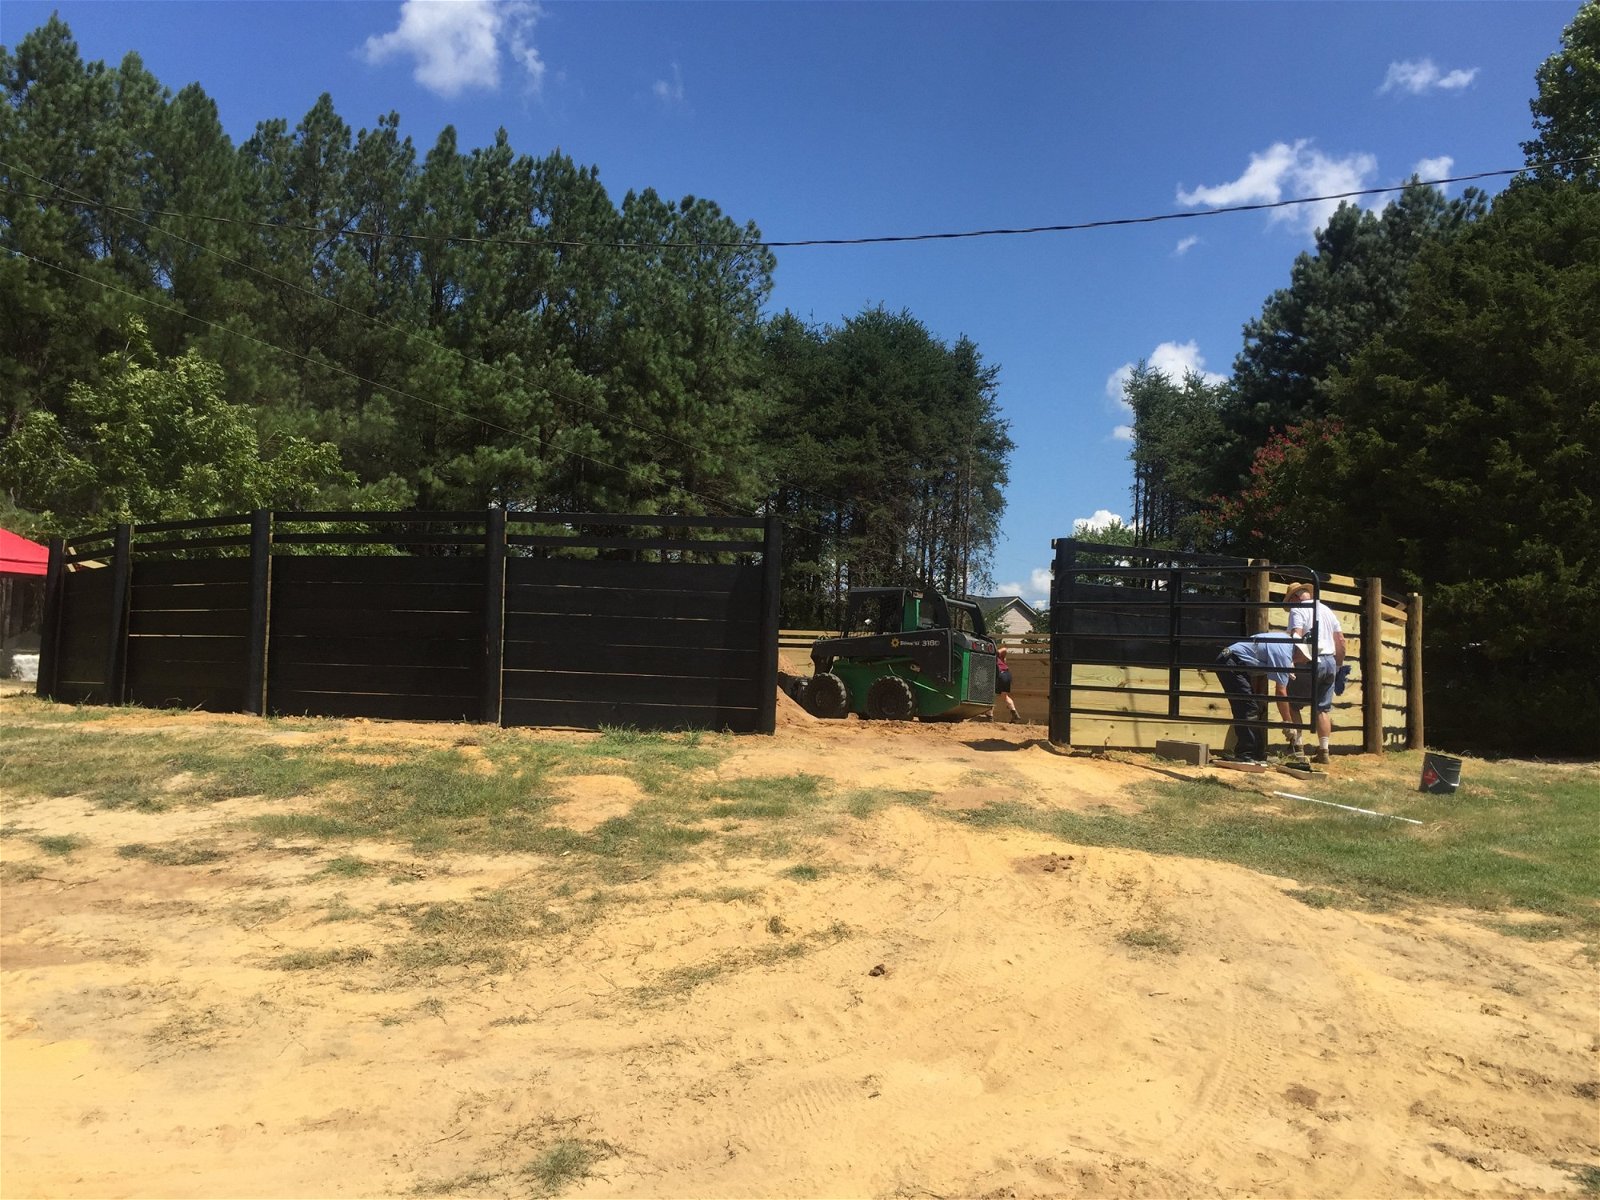 Round Pen under construction with equipment and workers present